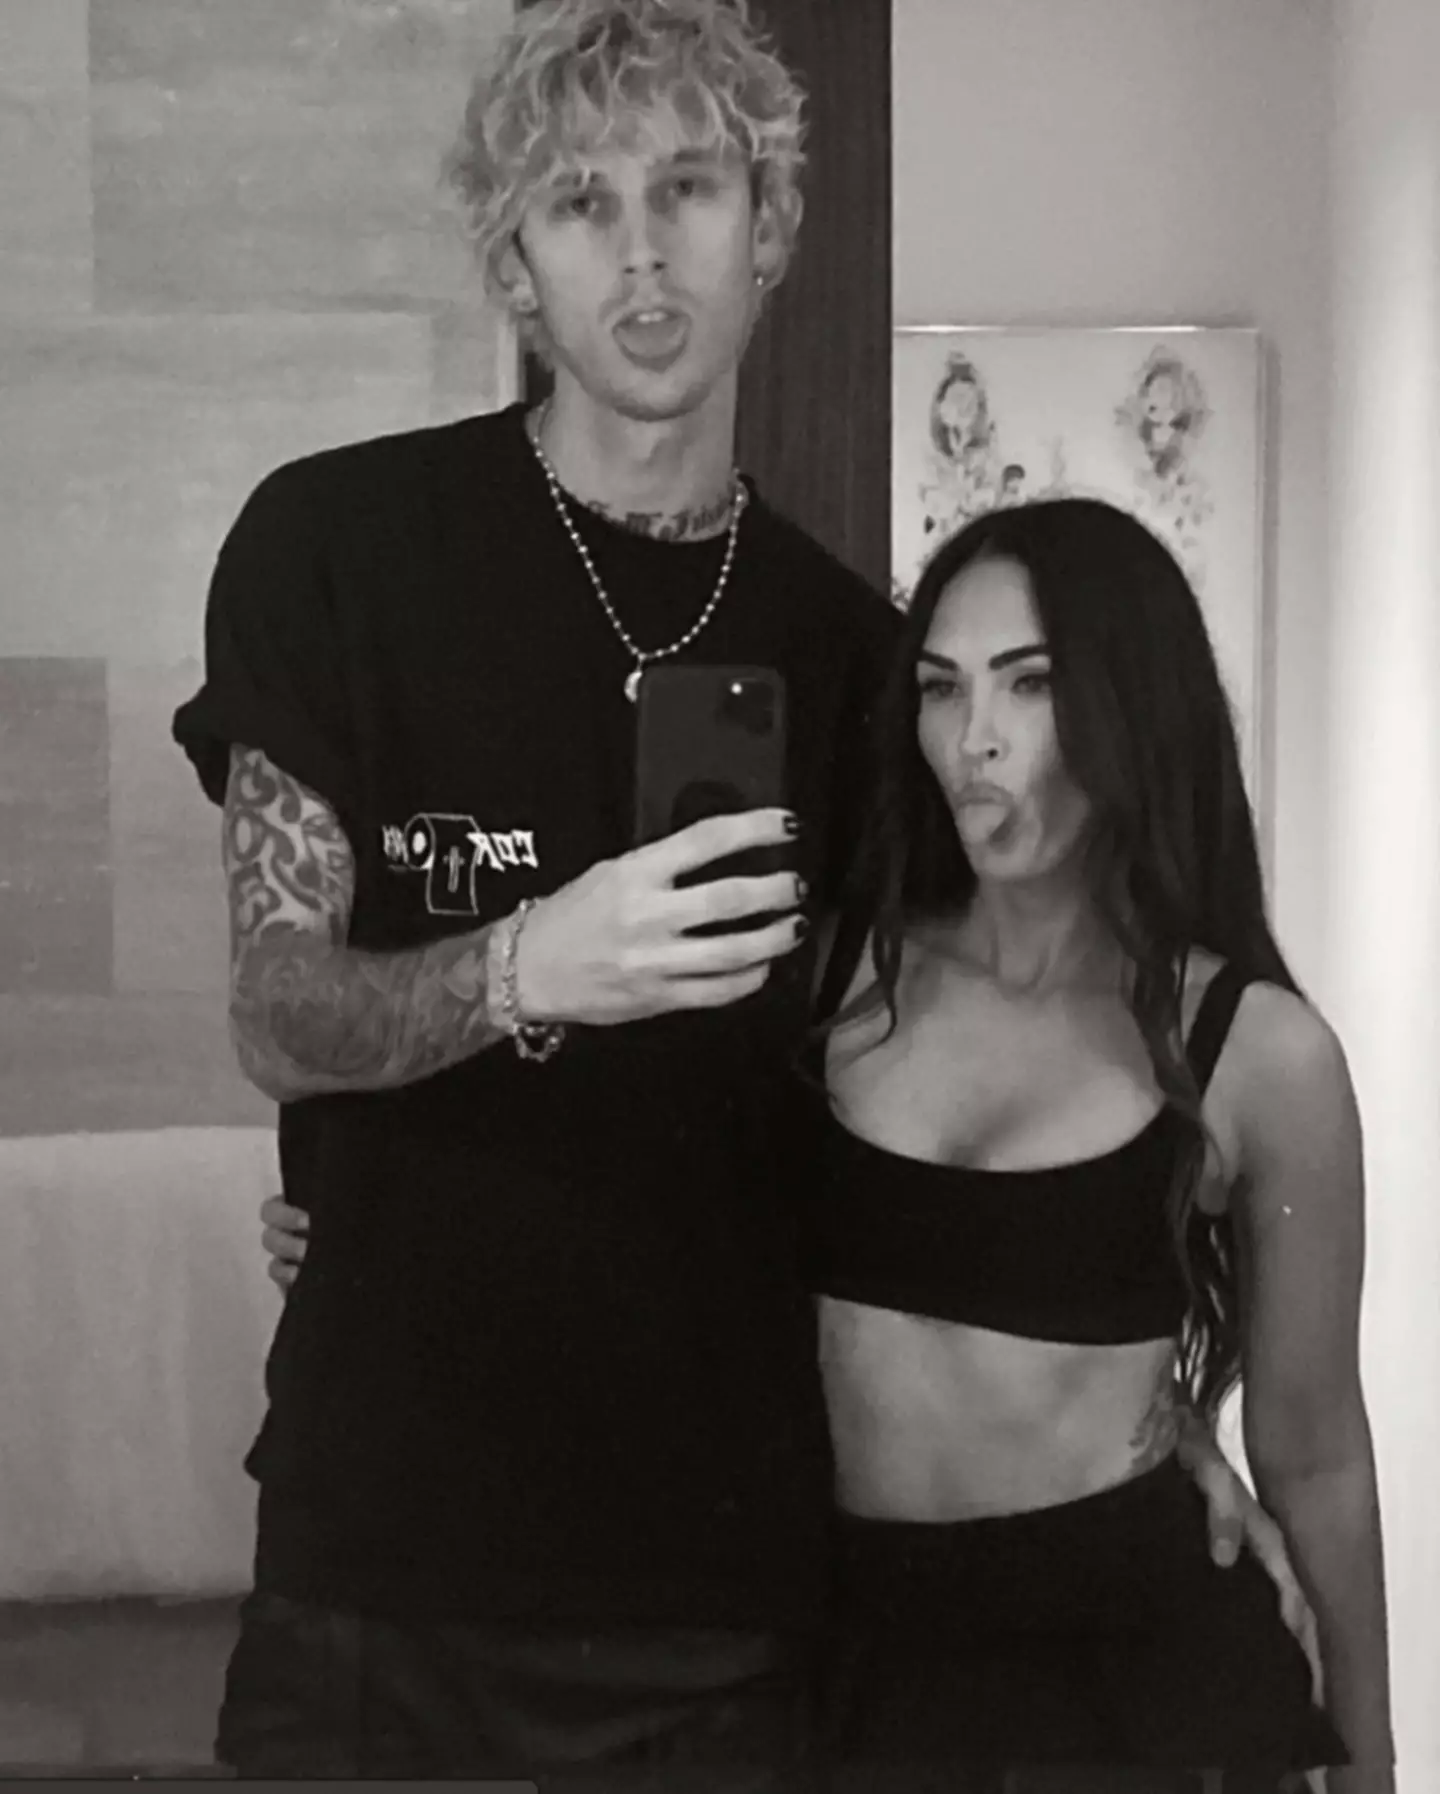 Fox previously spoke about body dysmorphia in a joint interview with Machine Gun Kelly.